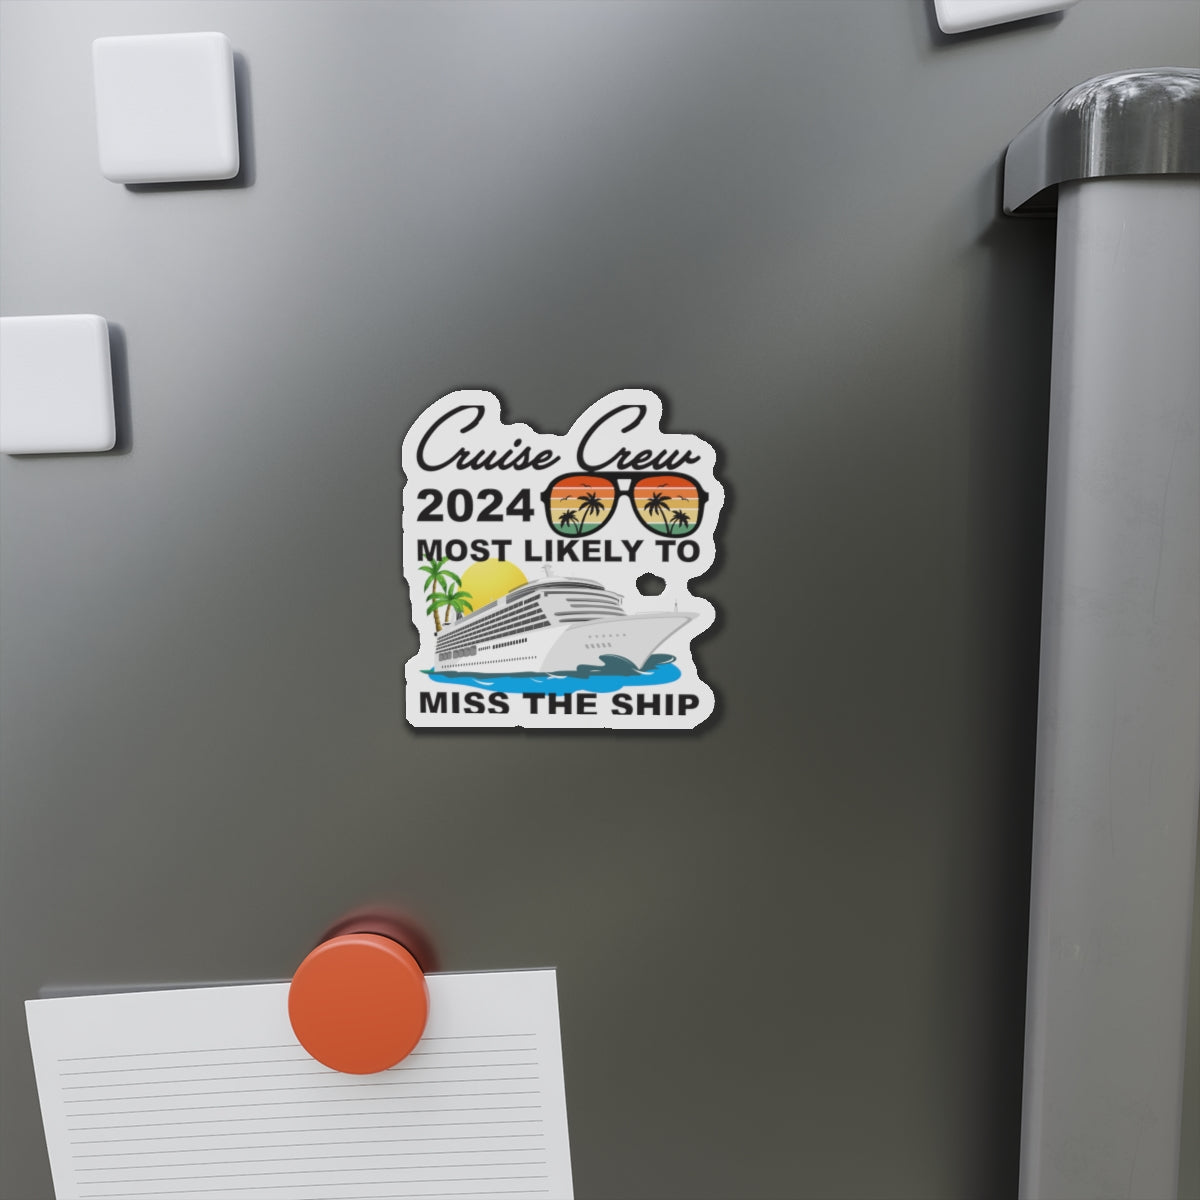 Cruise Crew 2024–Most Likely To Miss The Ship–Cruise Ship Door Magnets